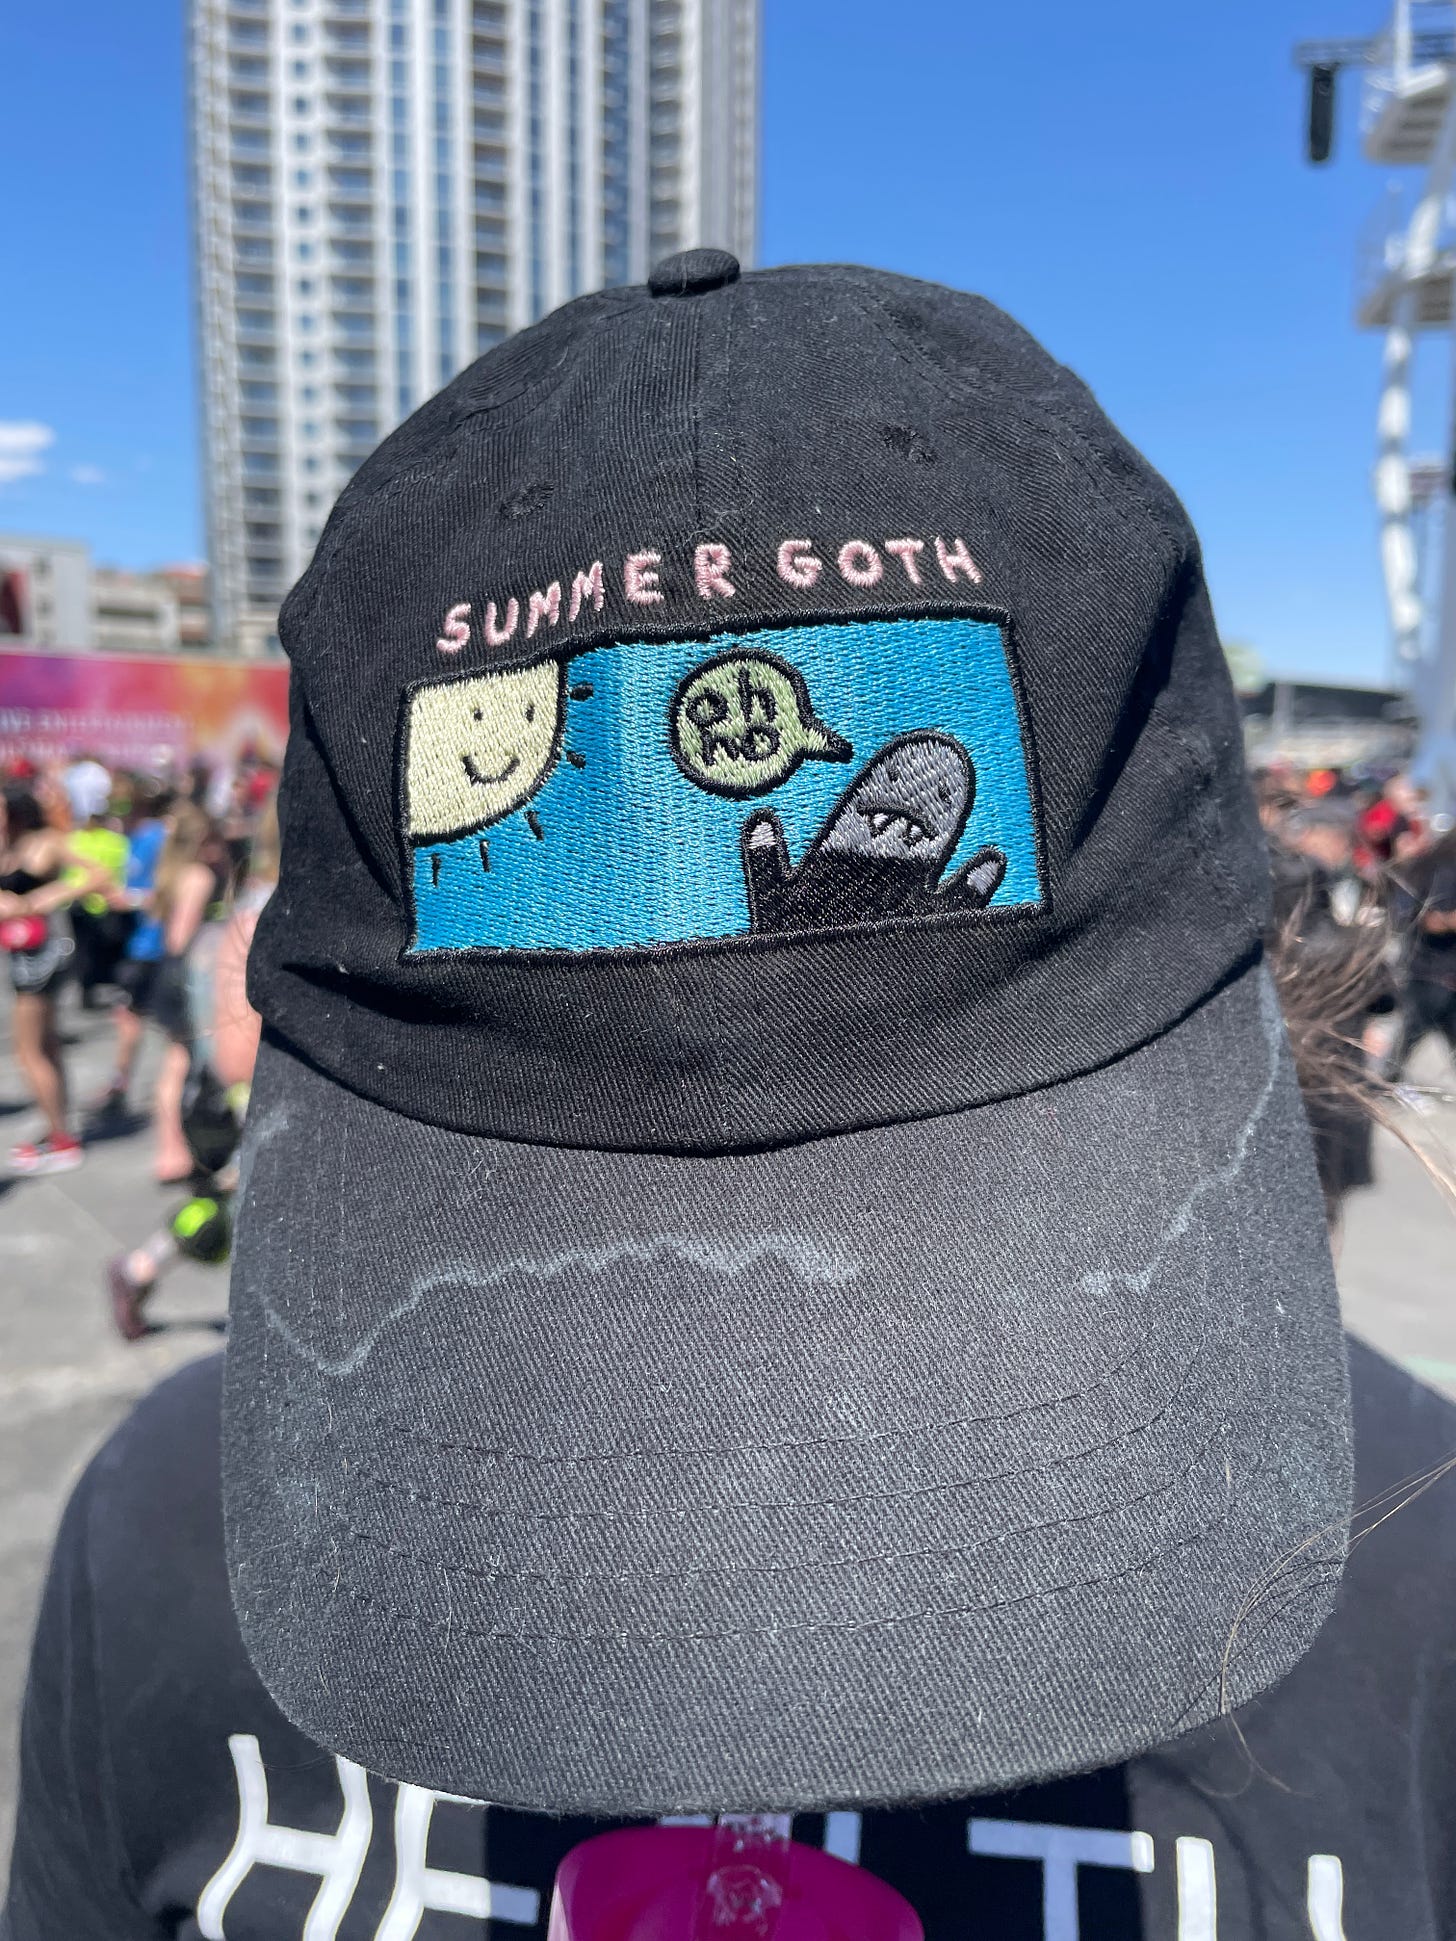 A baseball cap of a single-panel comic of a goth in the sun saying "Oh no". The panel is titled "Summer Goth"